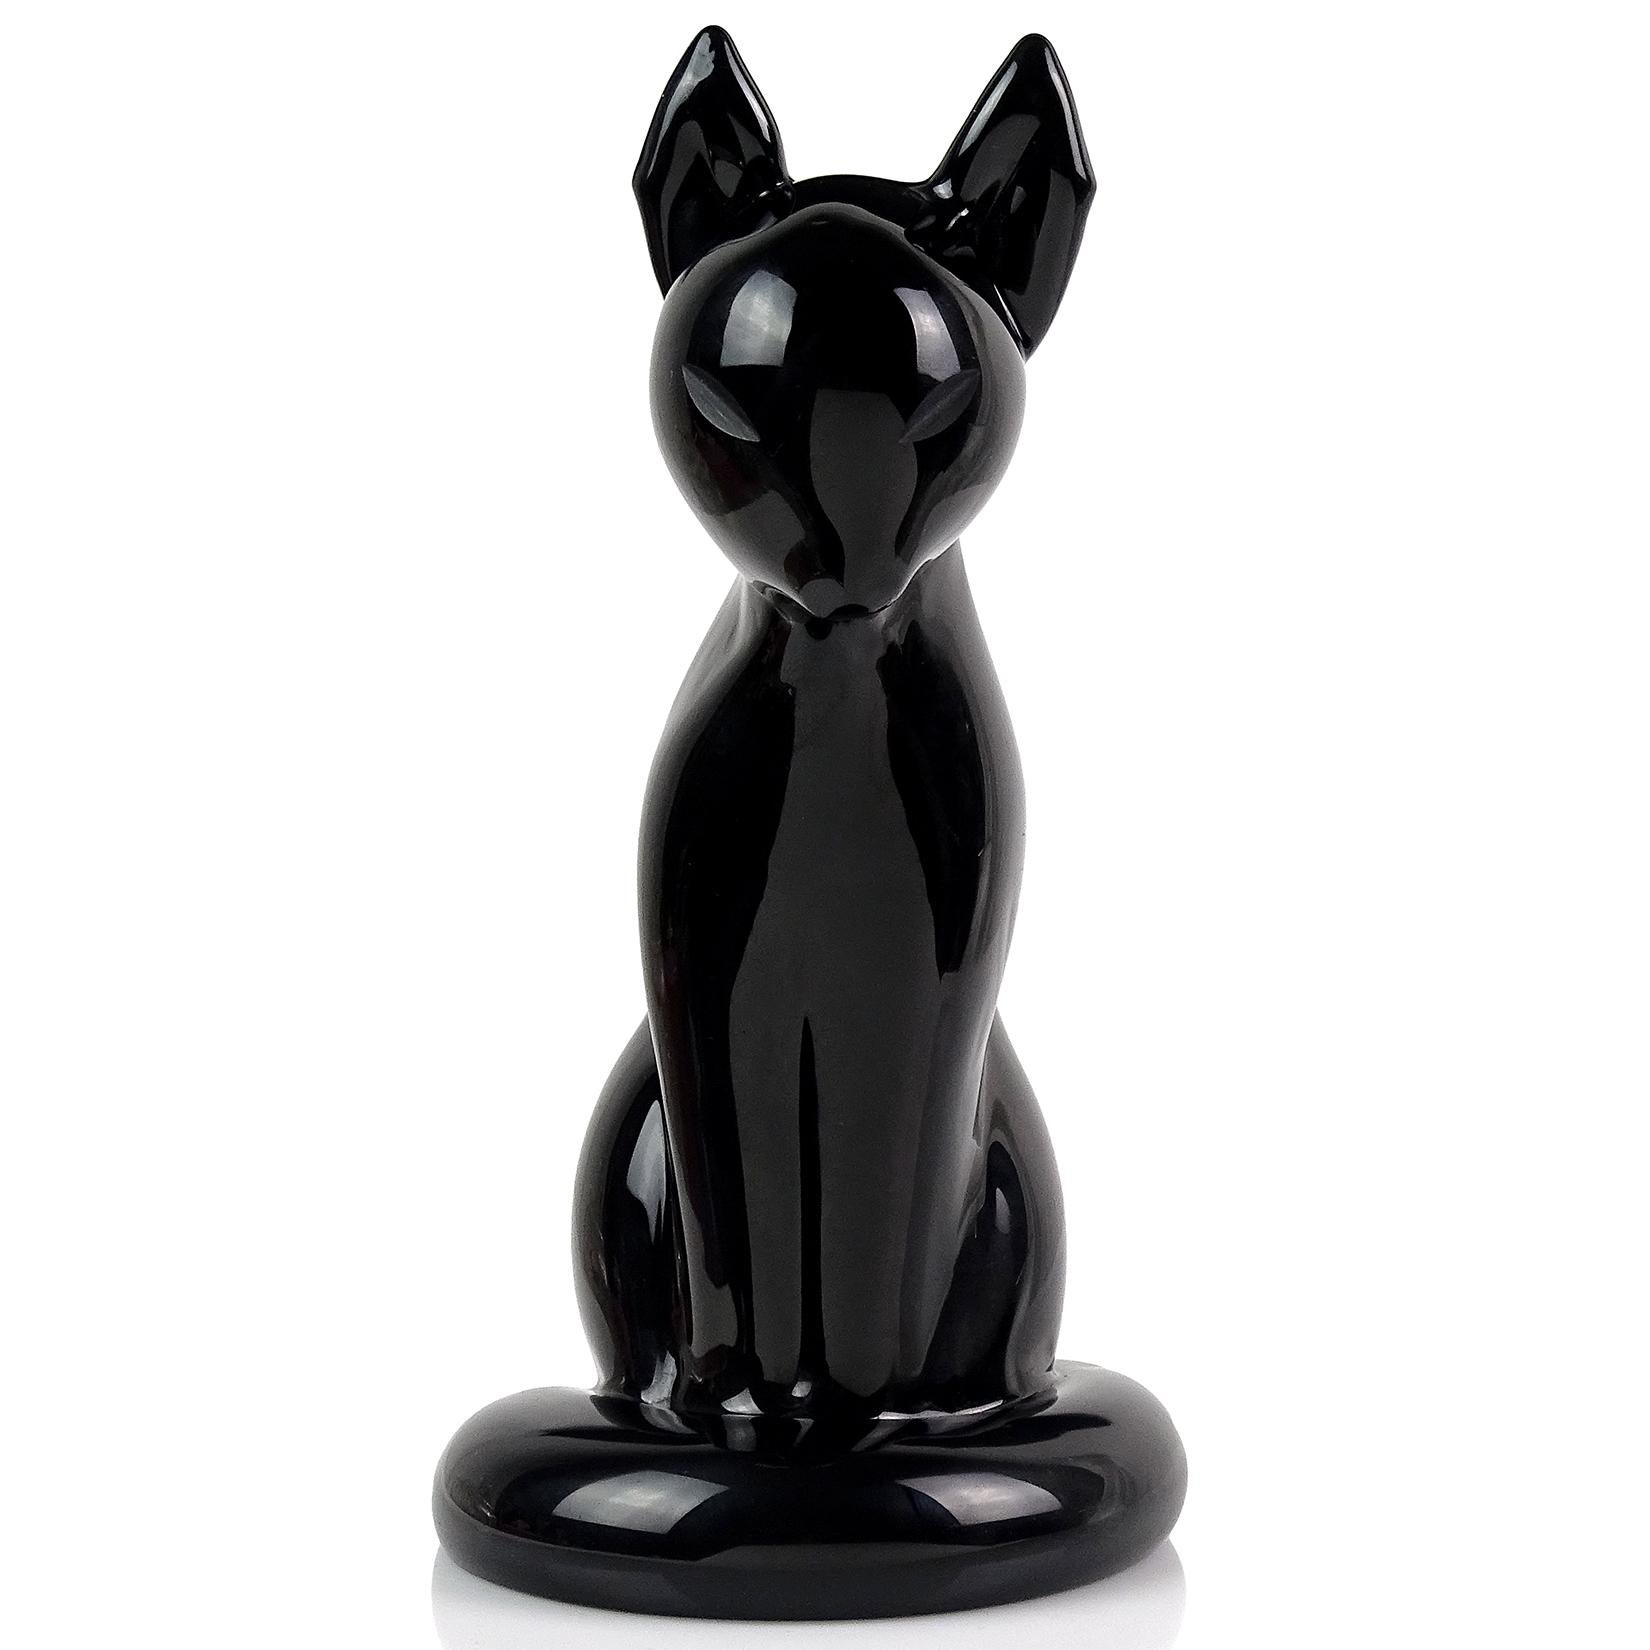 Gorgeous vintage Murano hand blown jet black Italian art glass kitty cat sculpture / figurine. Fully signed underneath, Archimede Seguso Murano, circa 1960-1970. Striking decorative piece, with an elegant shape. Almost Egyptian style with the